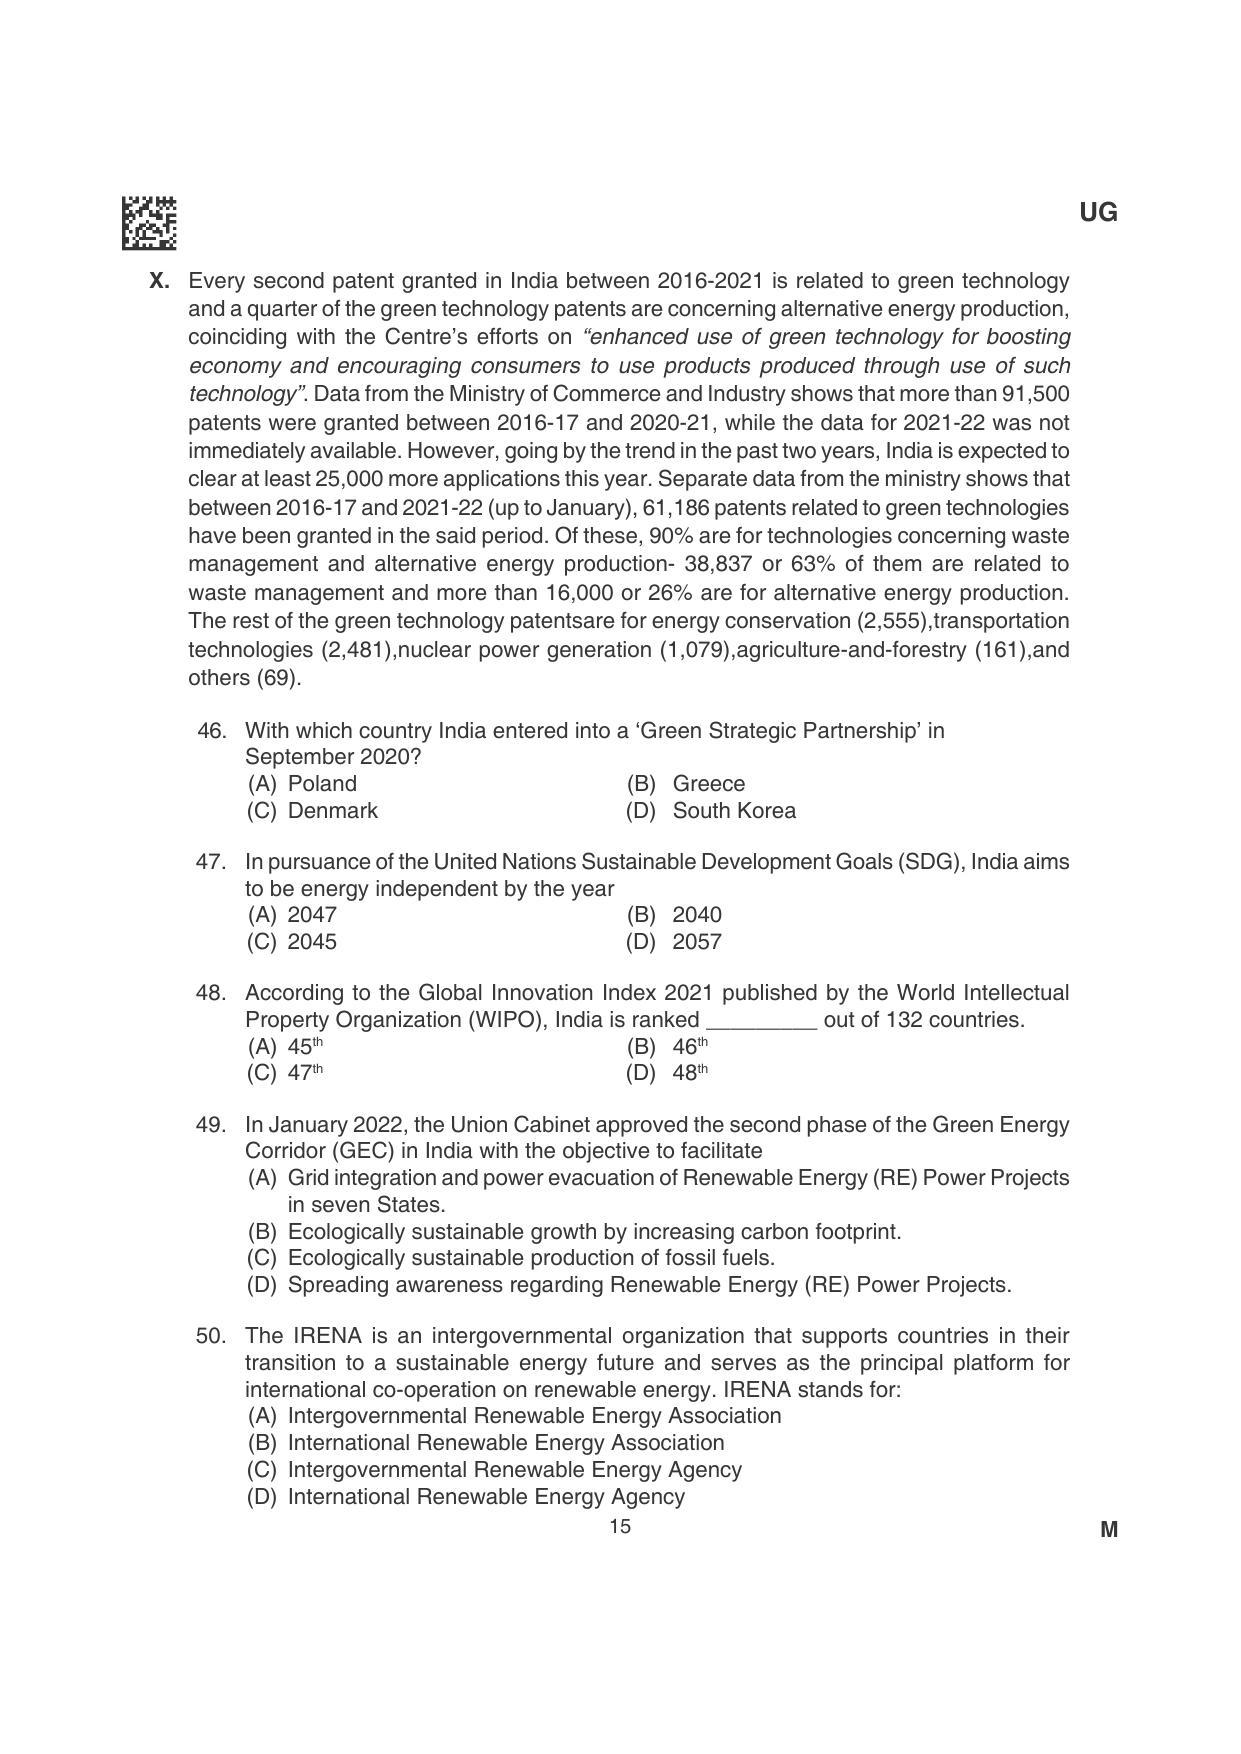 CLAT 2022 UG Question Papers - Page 15